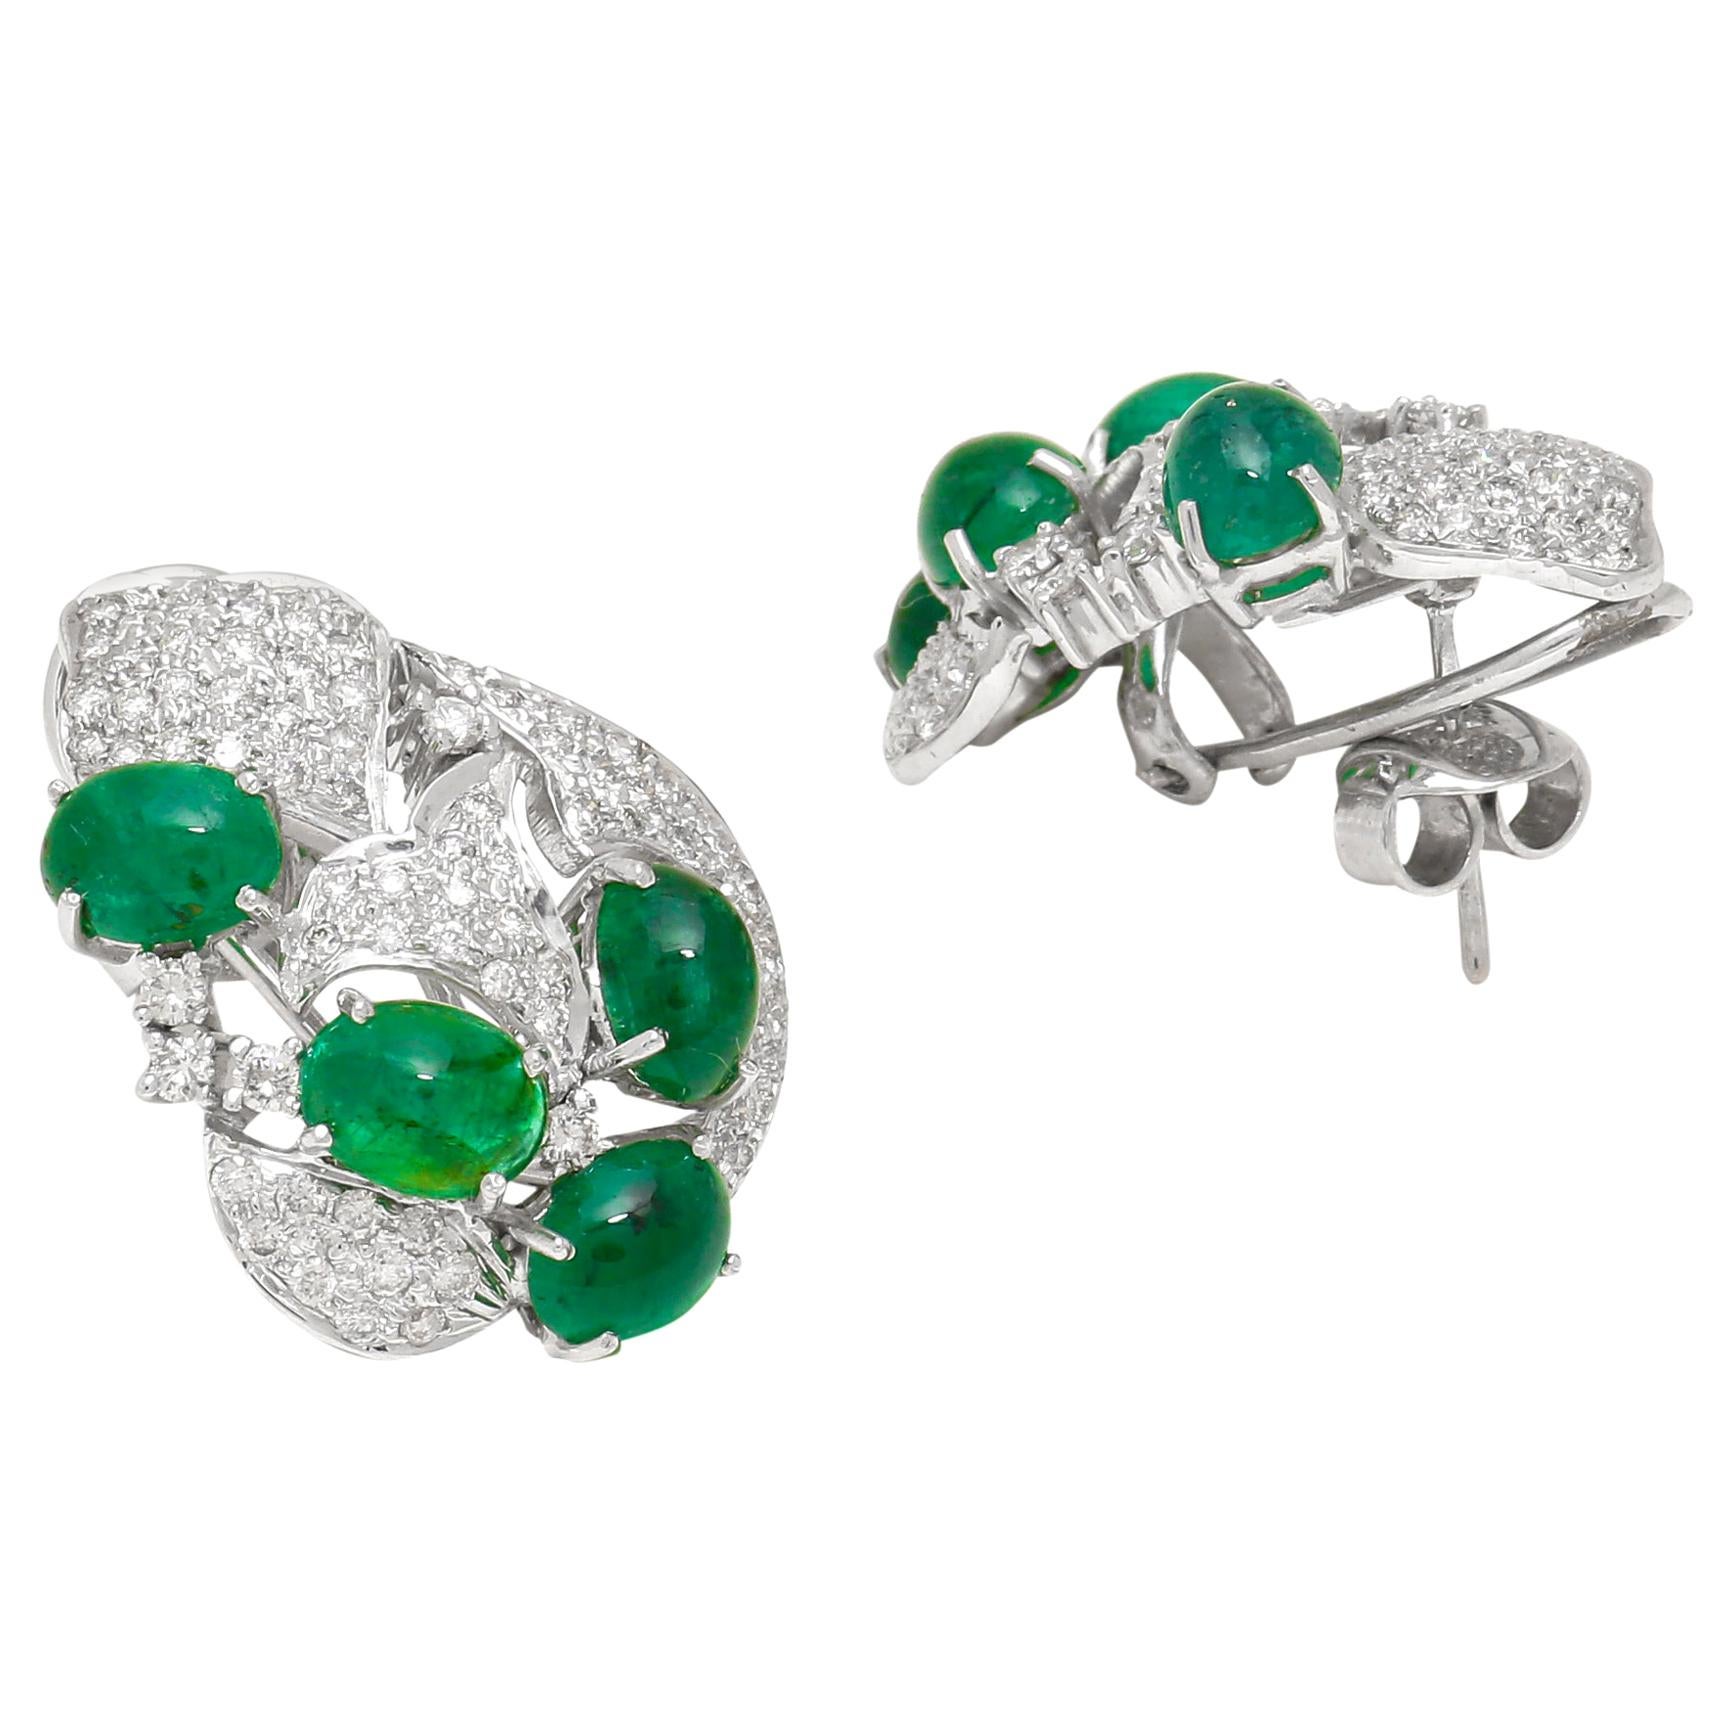 Emerald Cabochon and Diamond Stud Earrings in 18 Karat White Gold